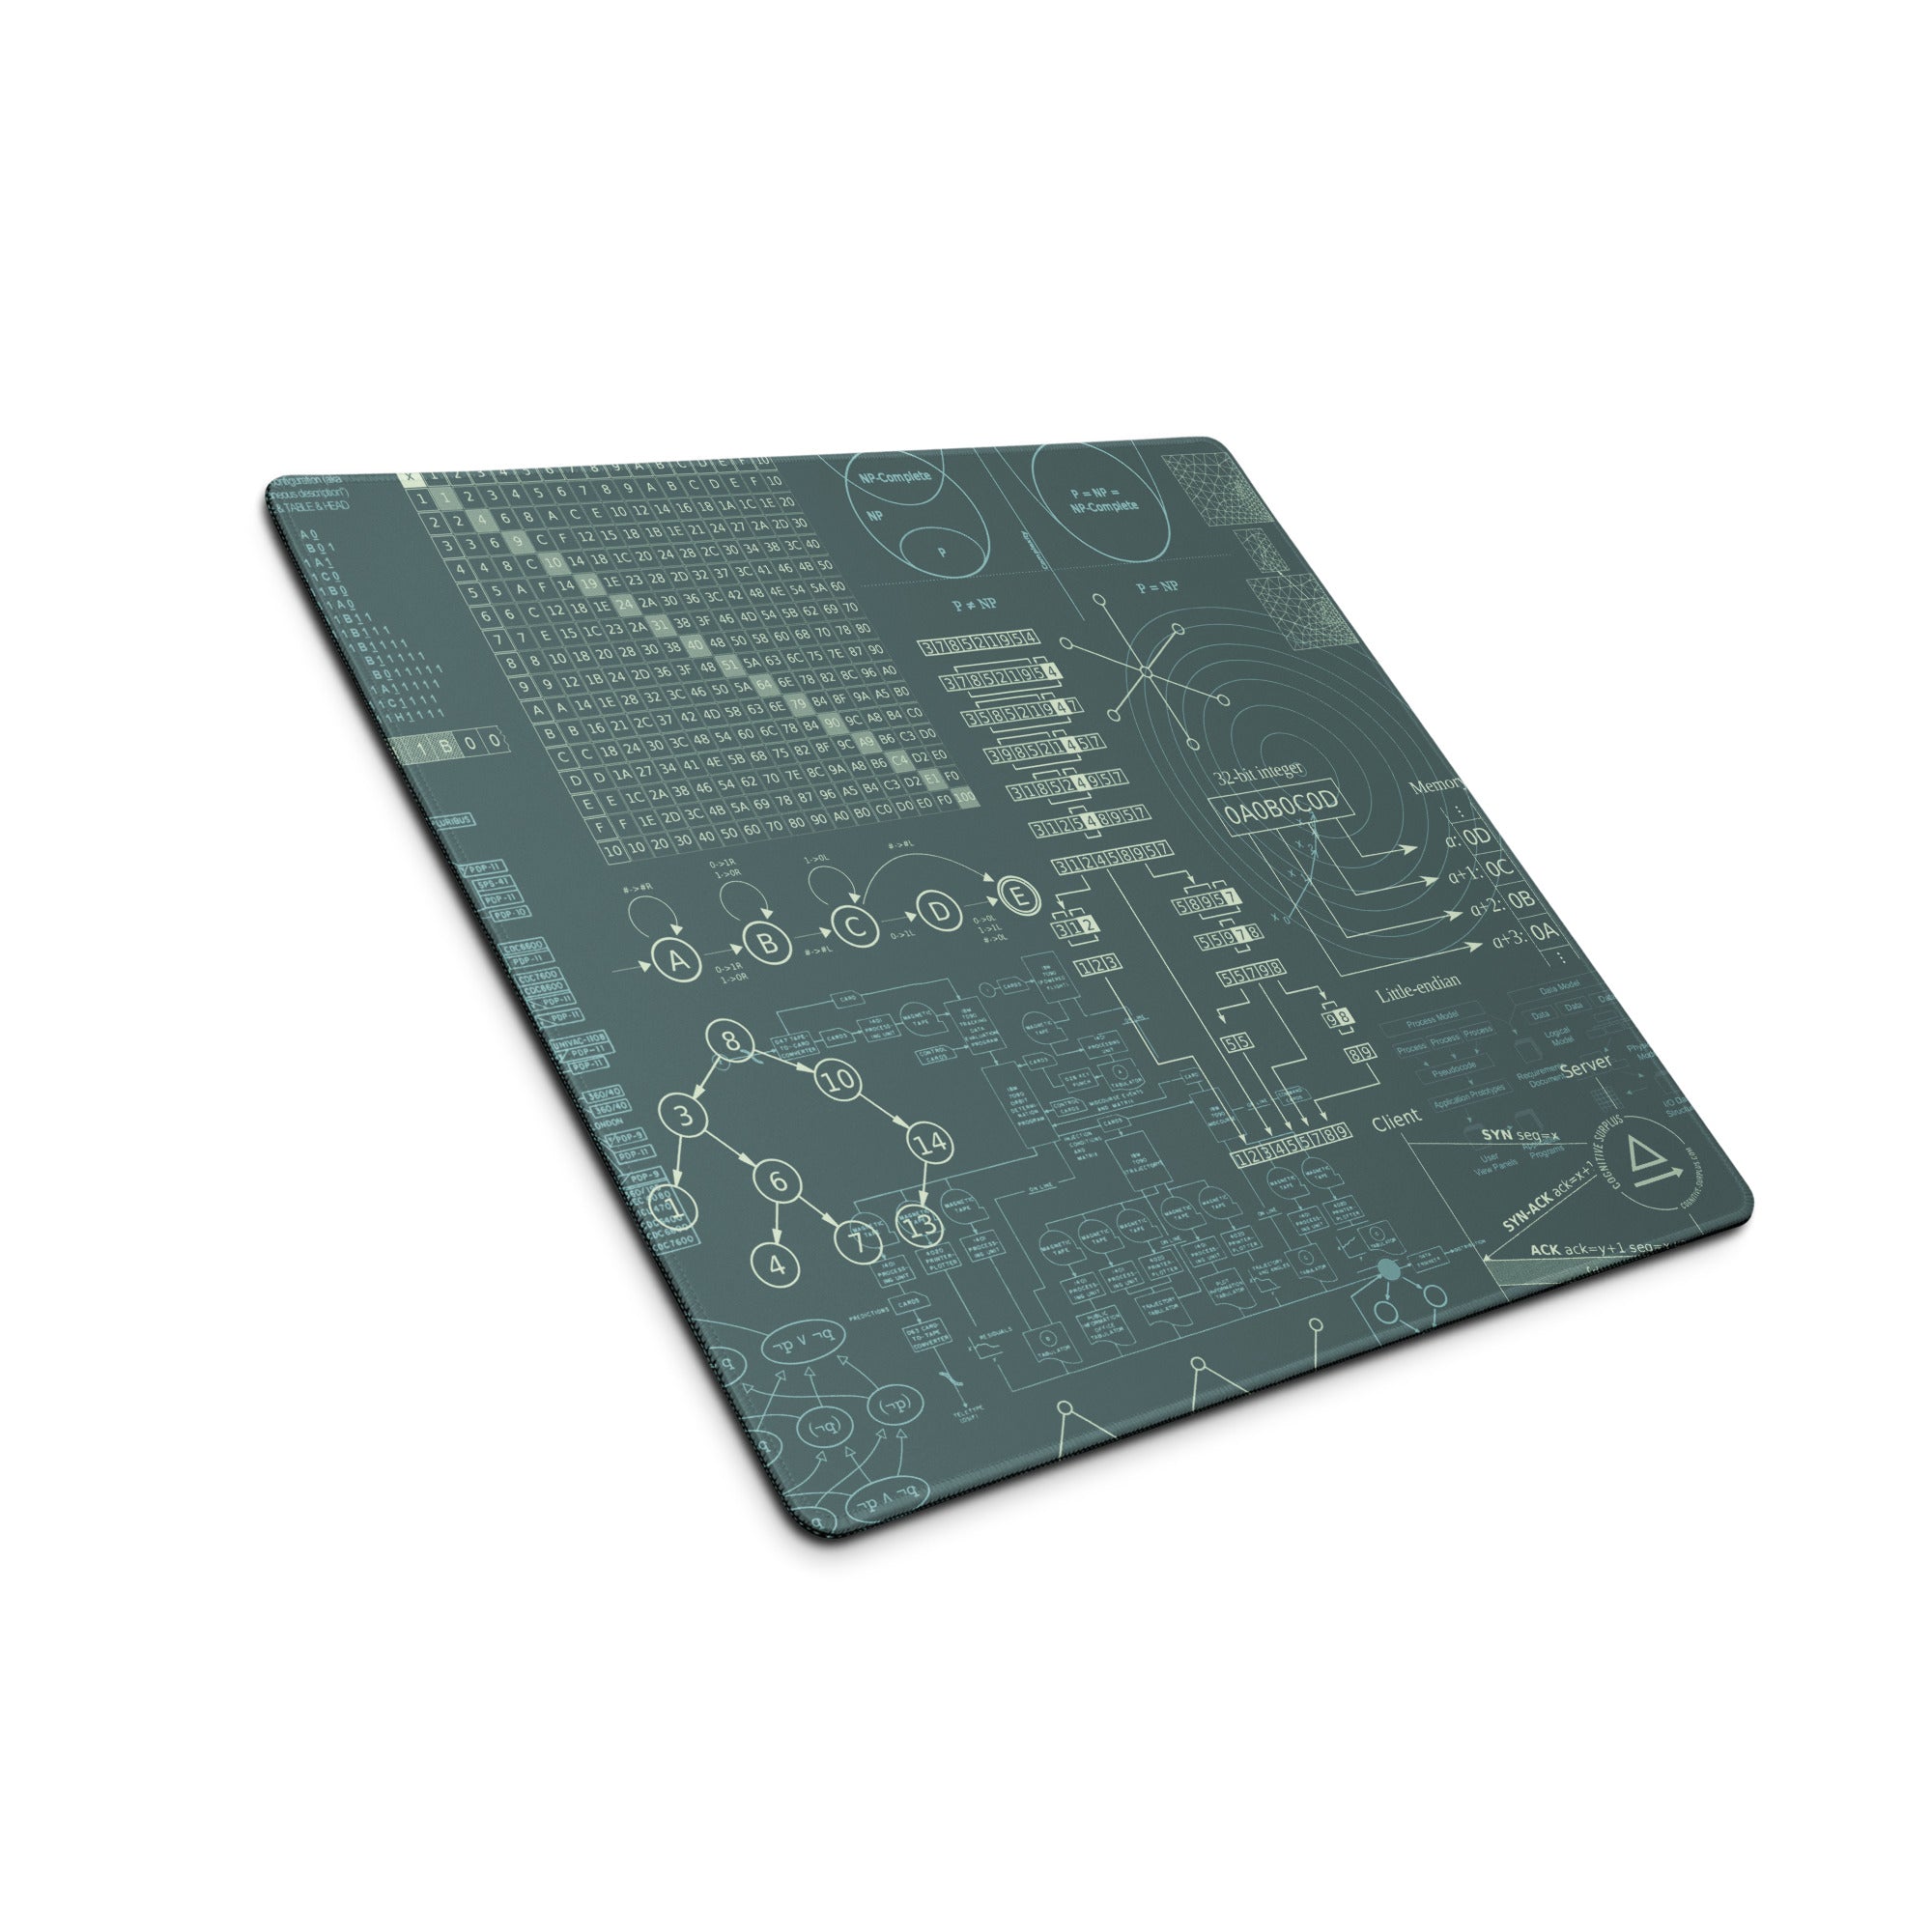 gaming-mouse-pad-white-18x16-front-6595e5ae51f3e.jpg